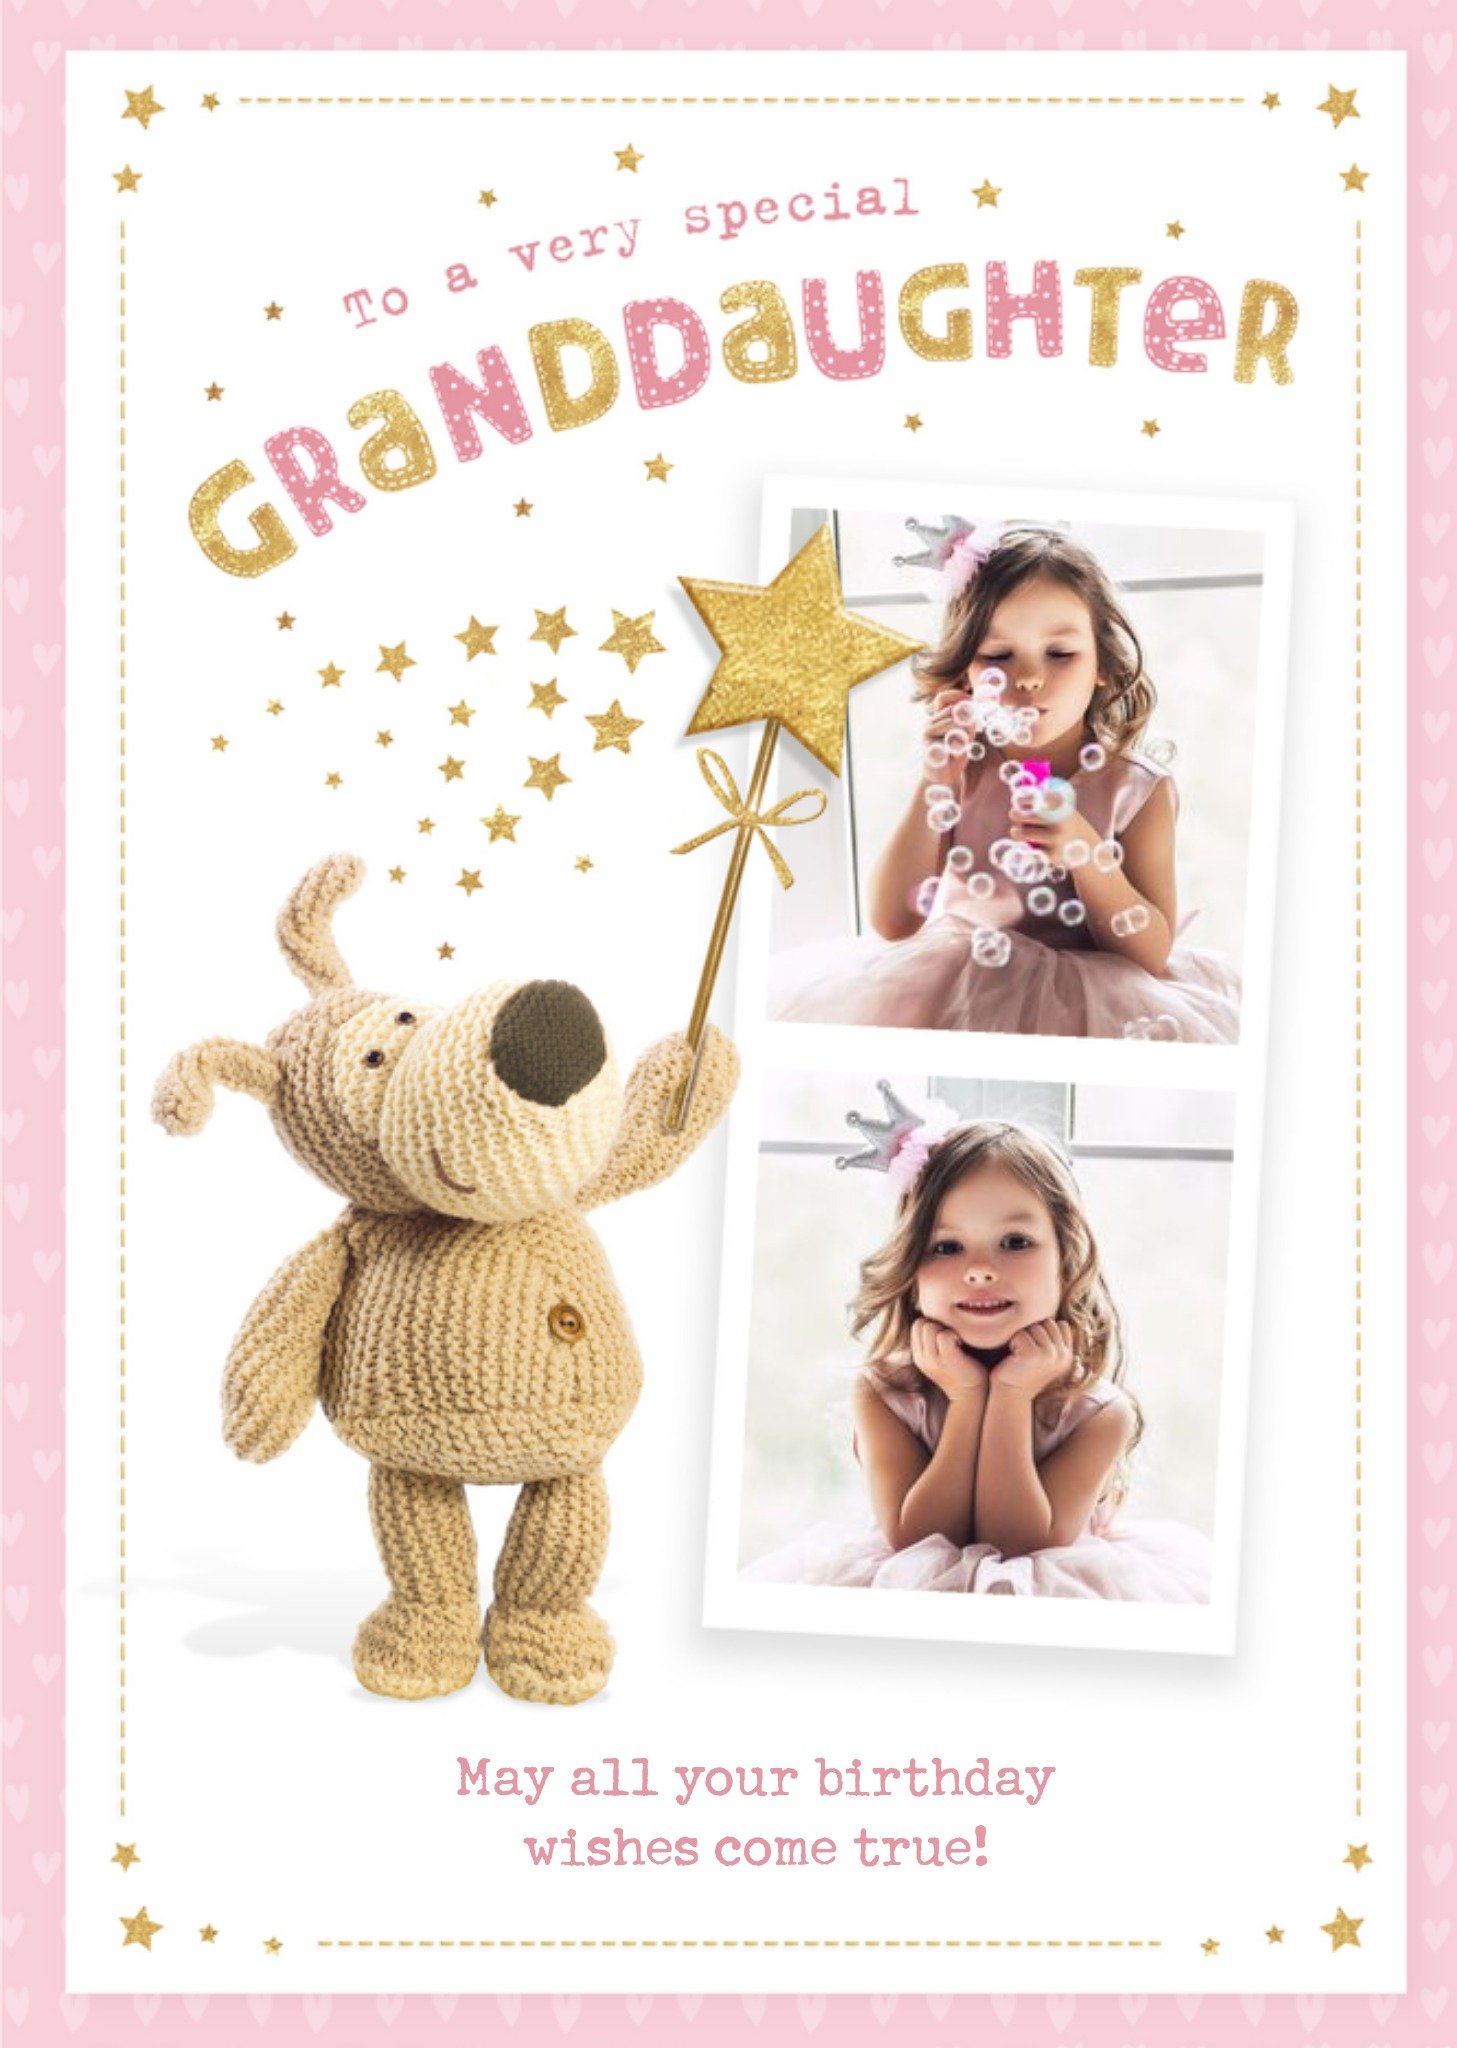 Cute Boofle Photo Upload Card - To A Very Special Granddaughter, Large